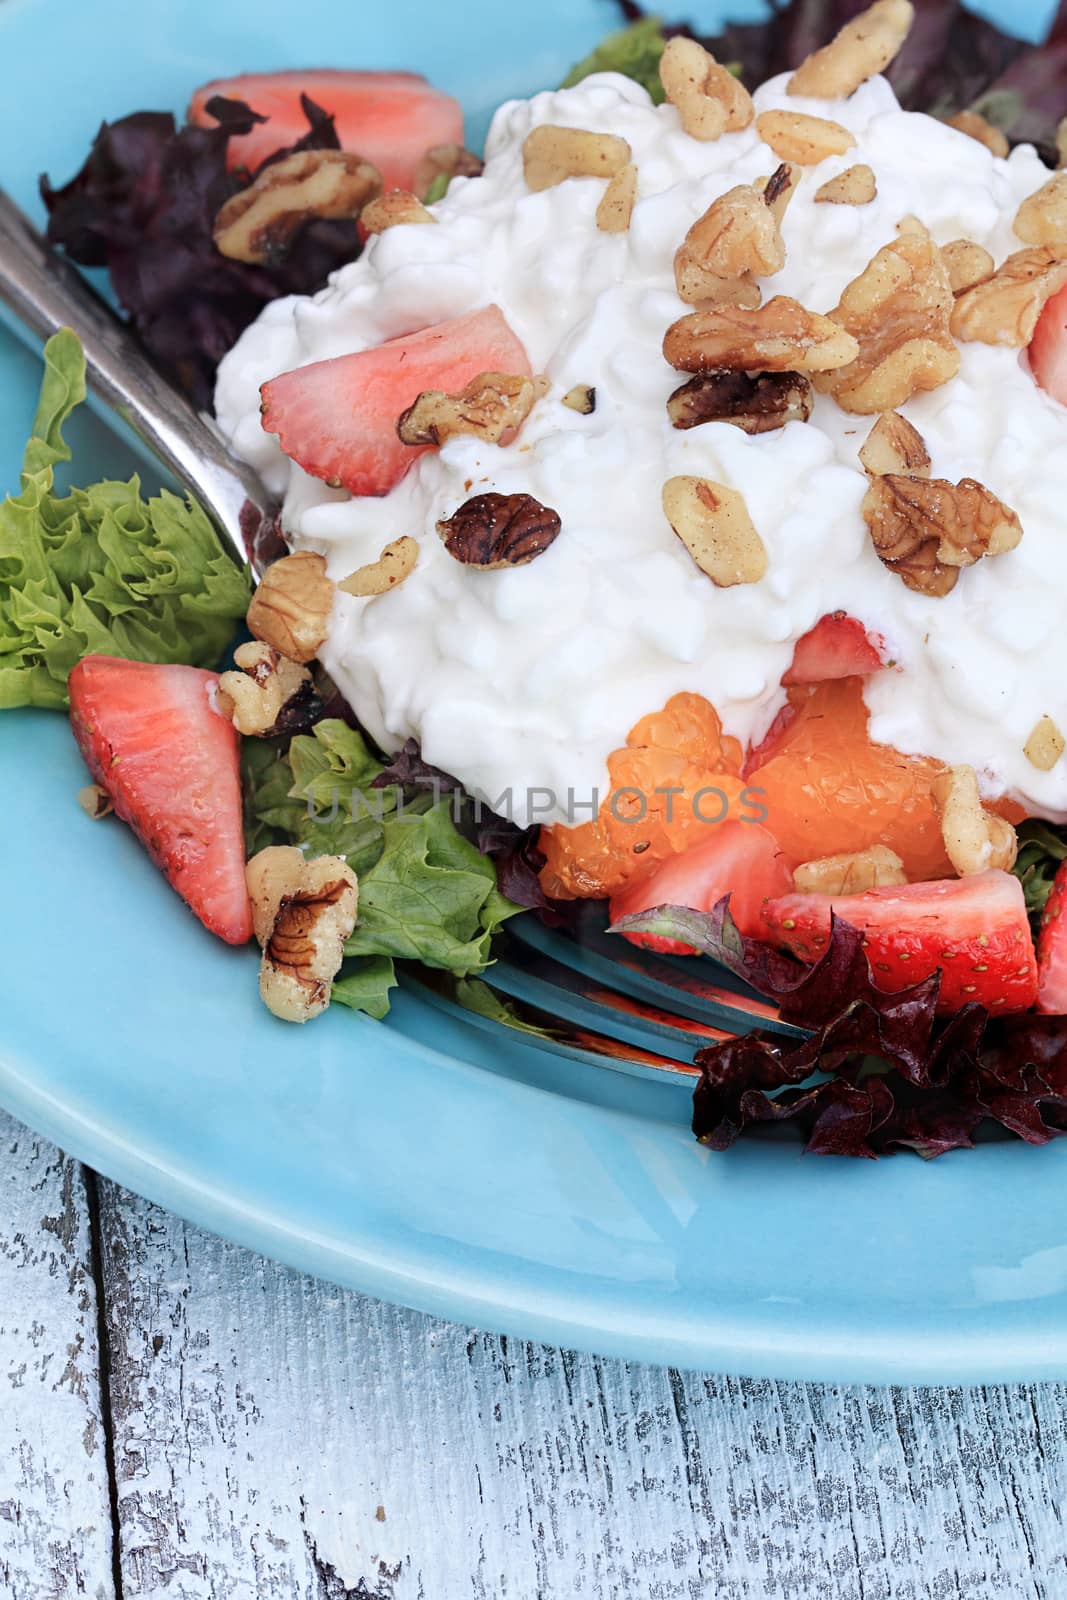 Strawberry and cottage cheese salad with mandarin oranges and walnuts. 